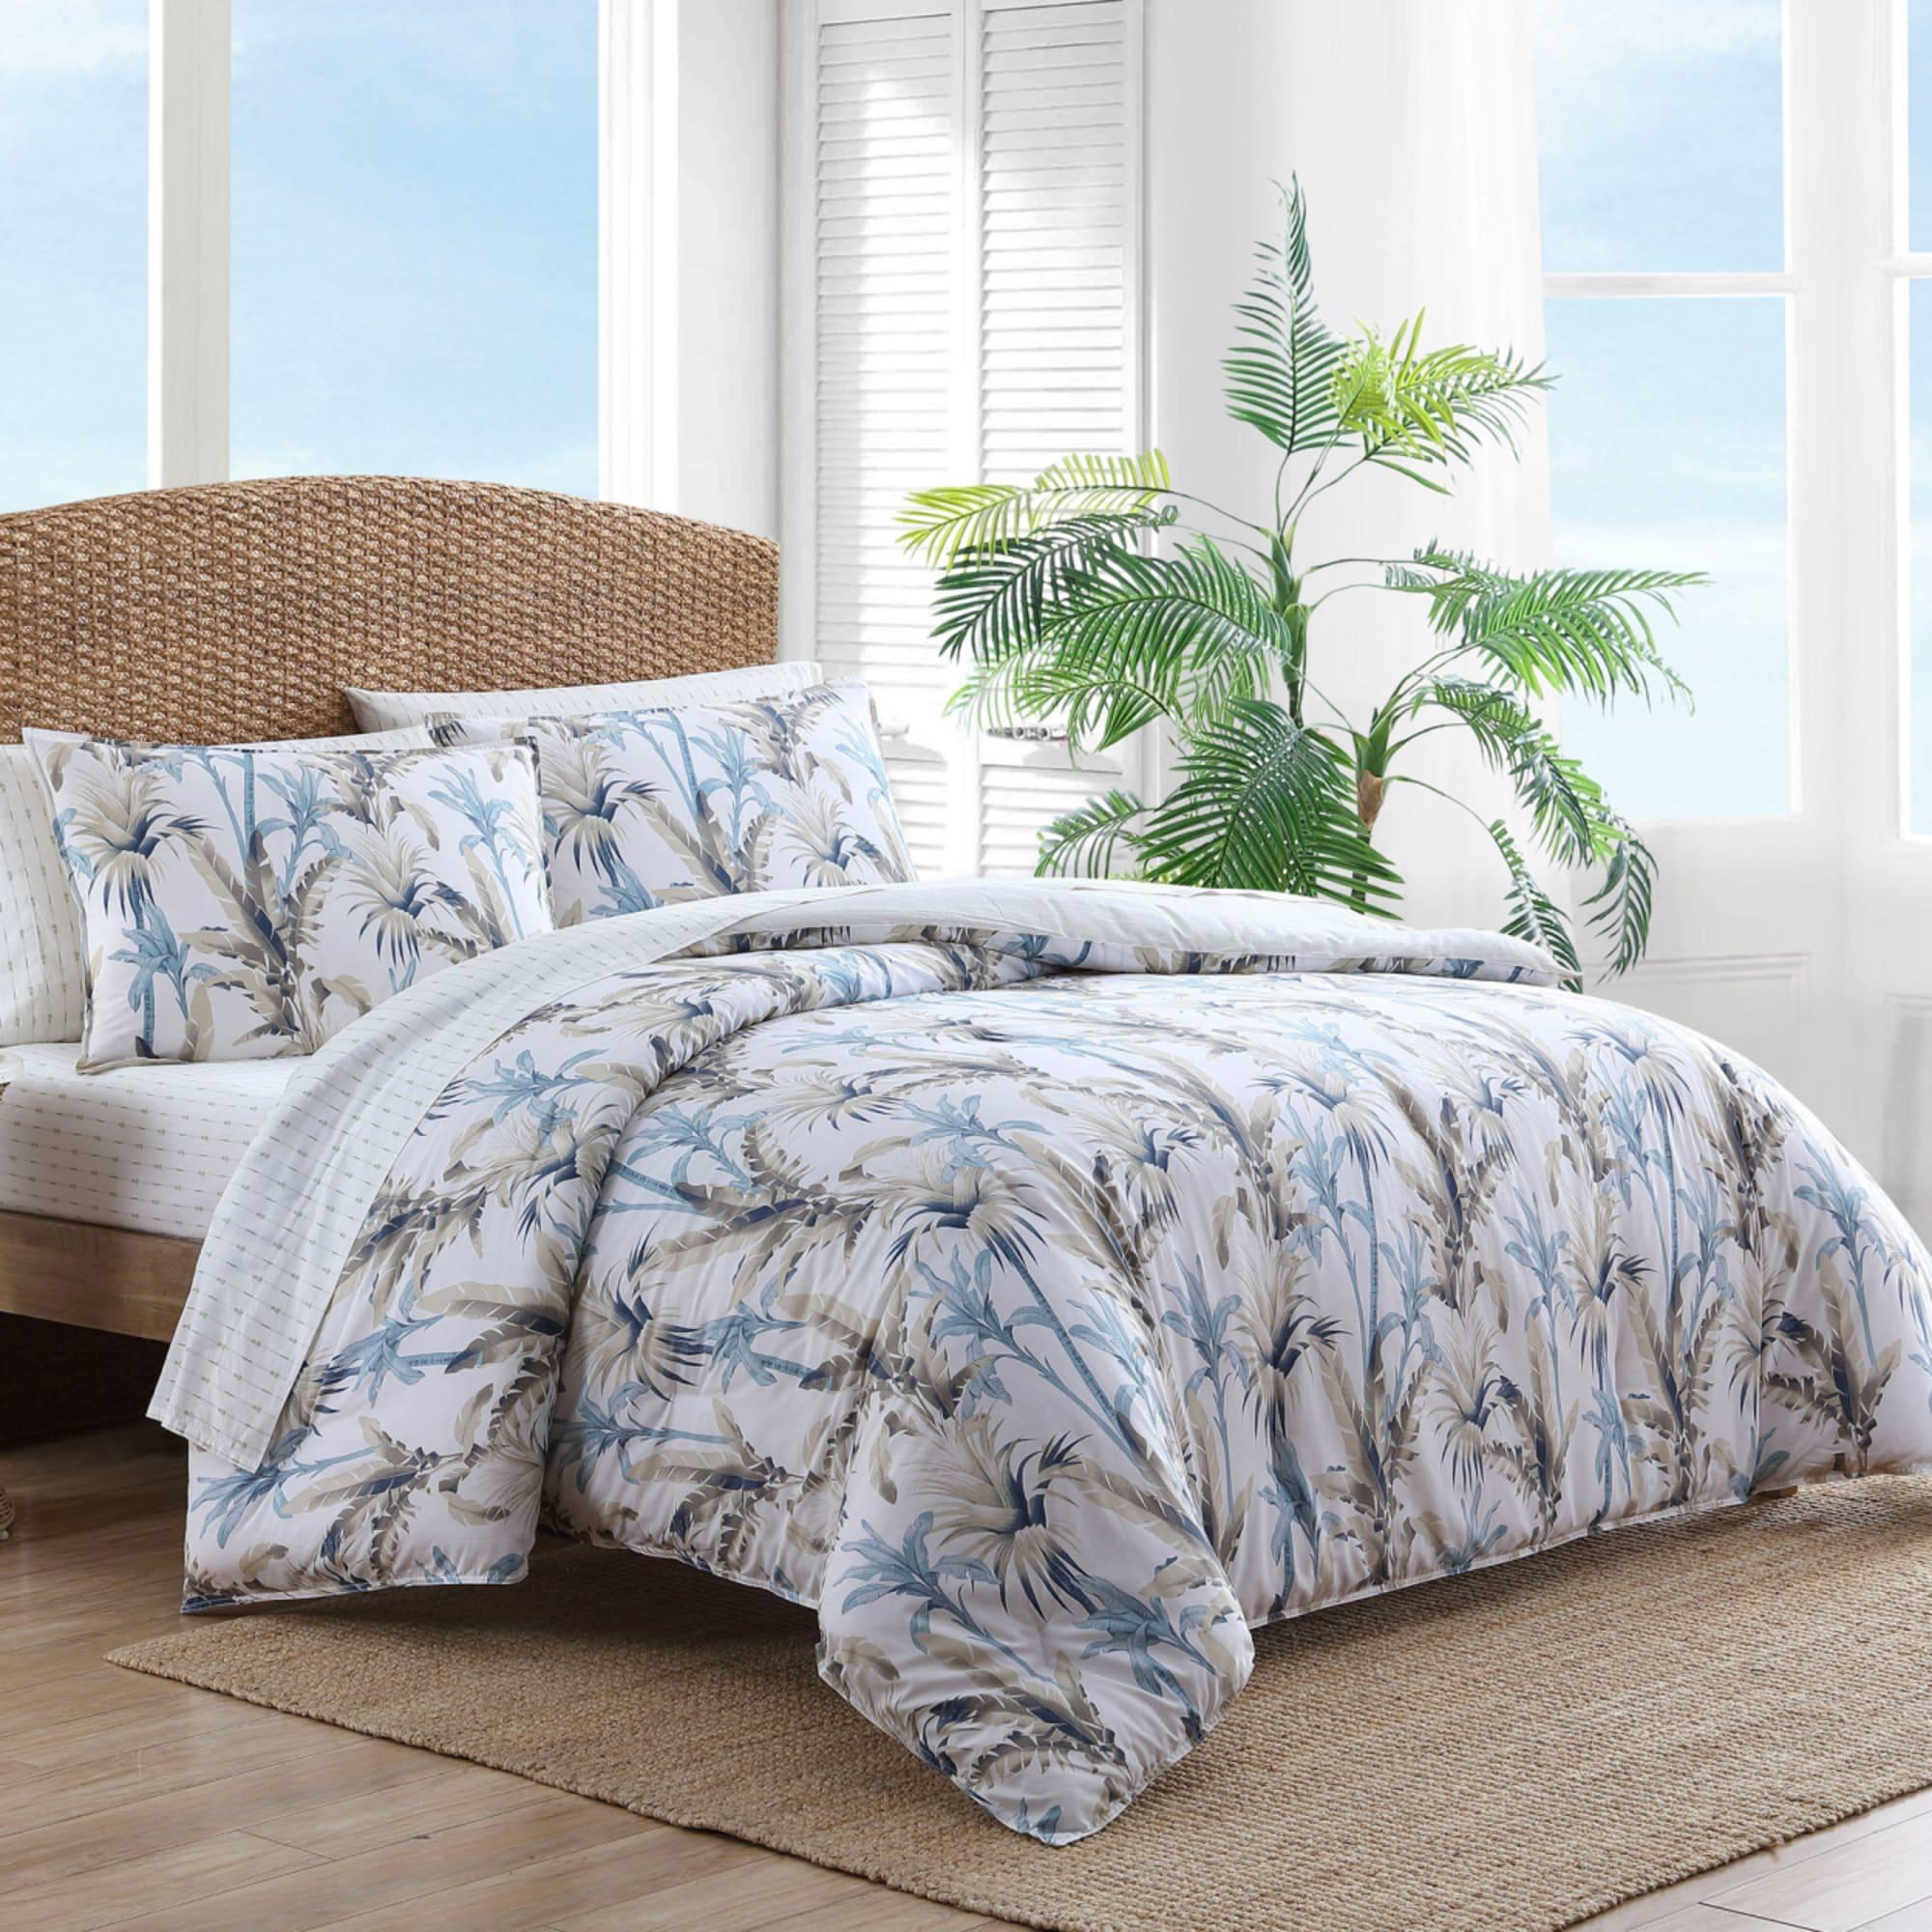 Tommy Bahama Catalina Quilt Cover Set Queen Image 3